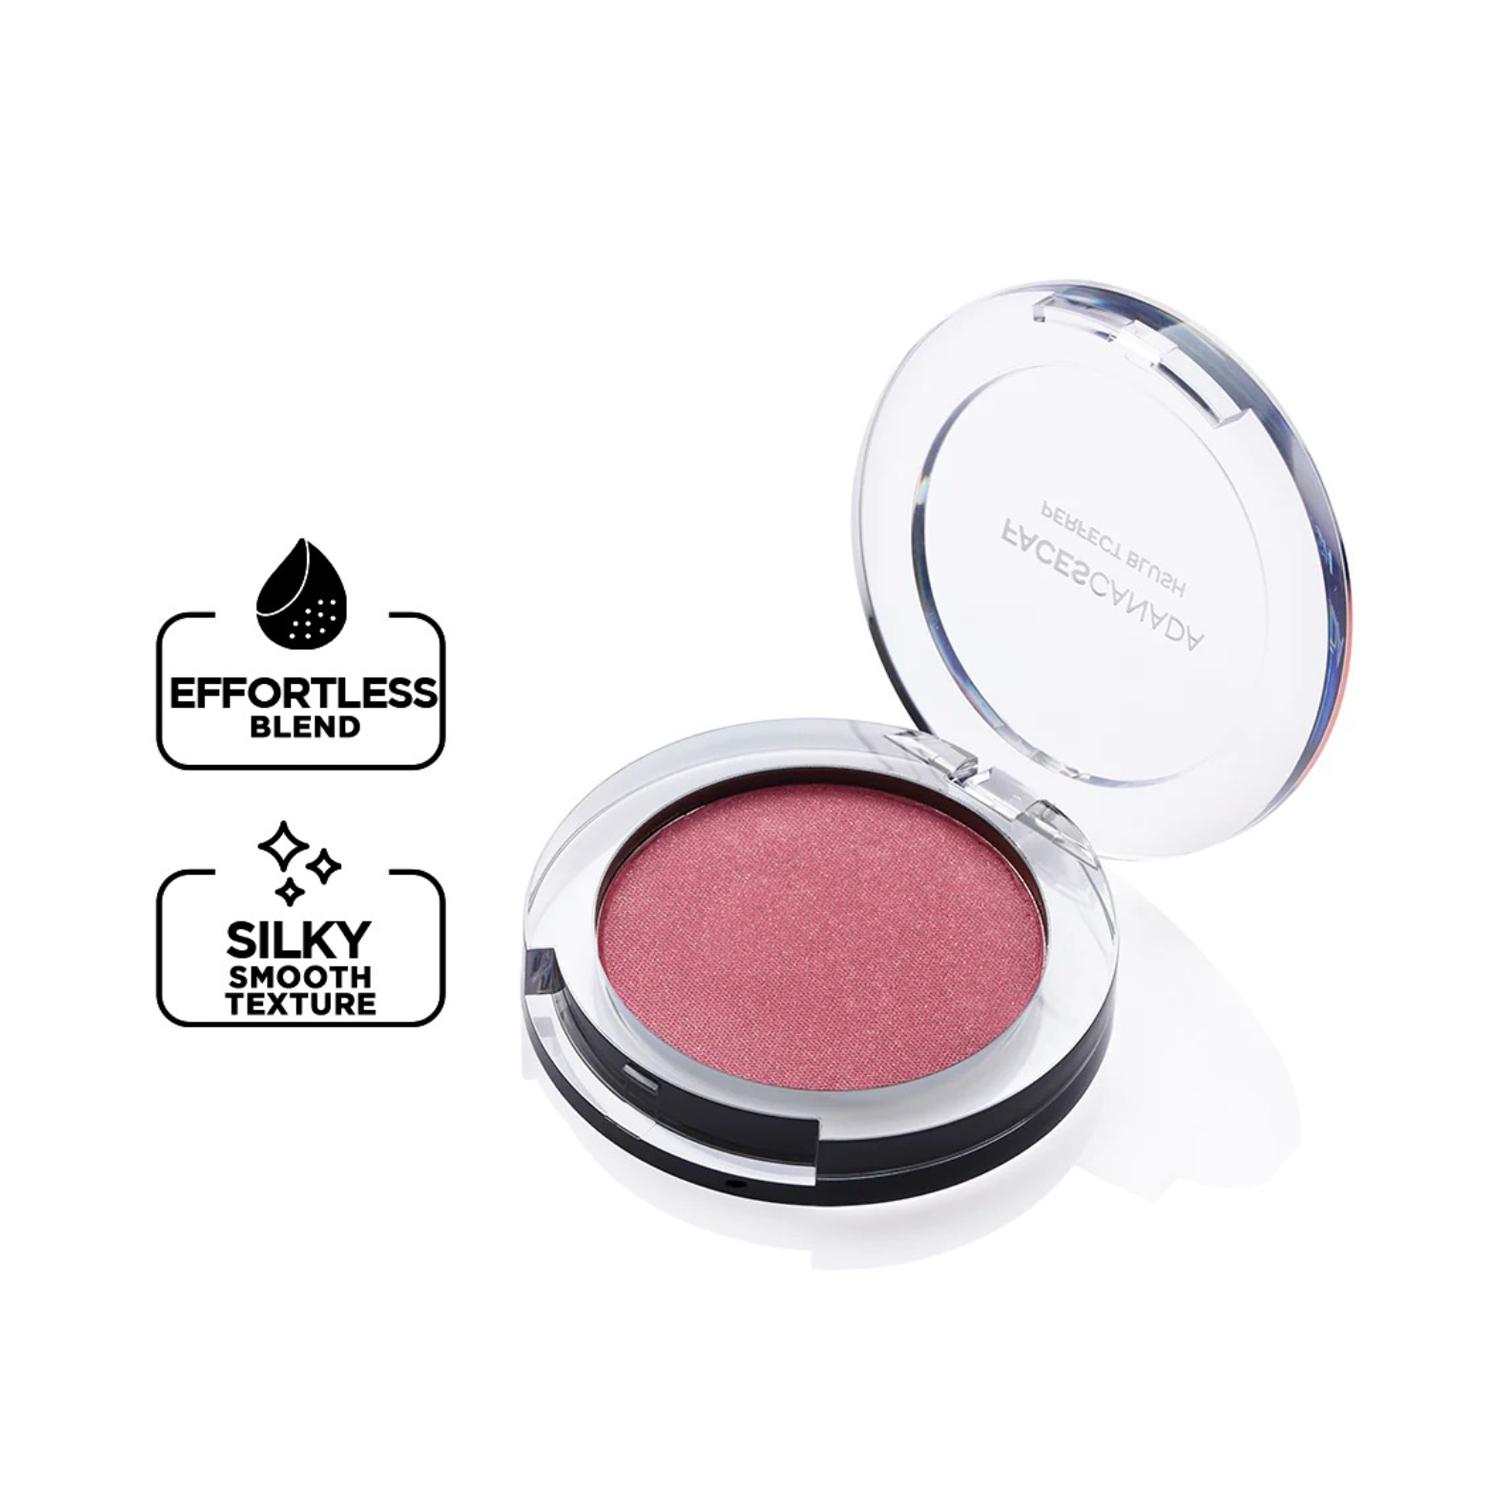 Faces Canada | Faces Canada Perfecting Blush - Hot Pink 02, Lightweight & Long Lasting Natural Looking Glow (5 g)